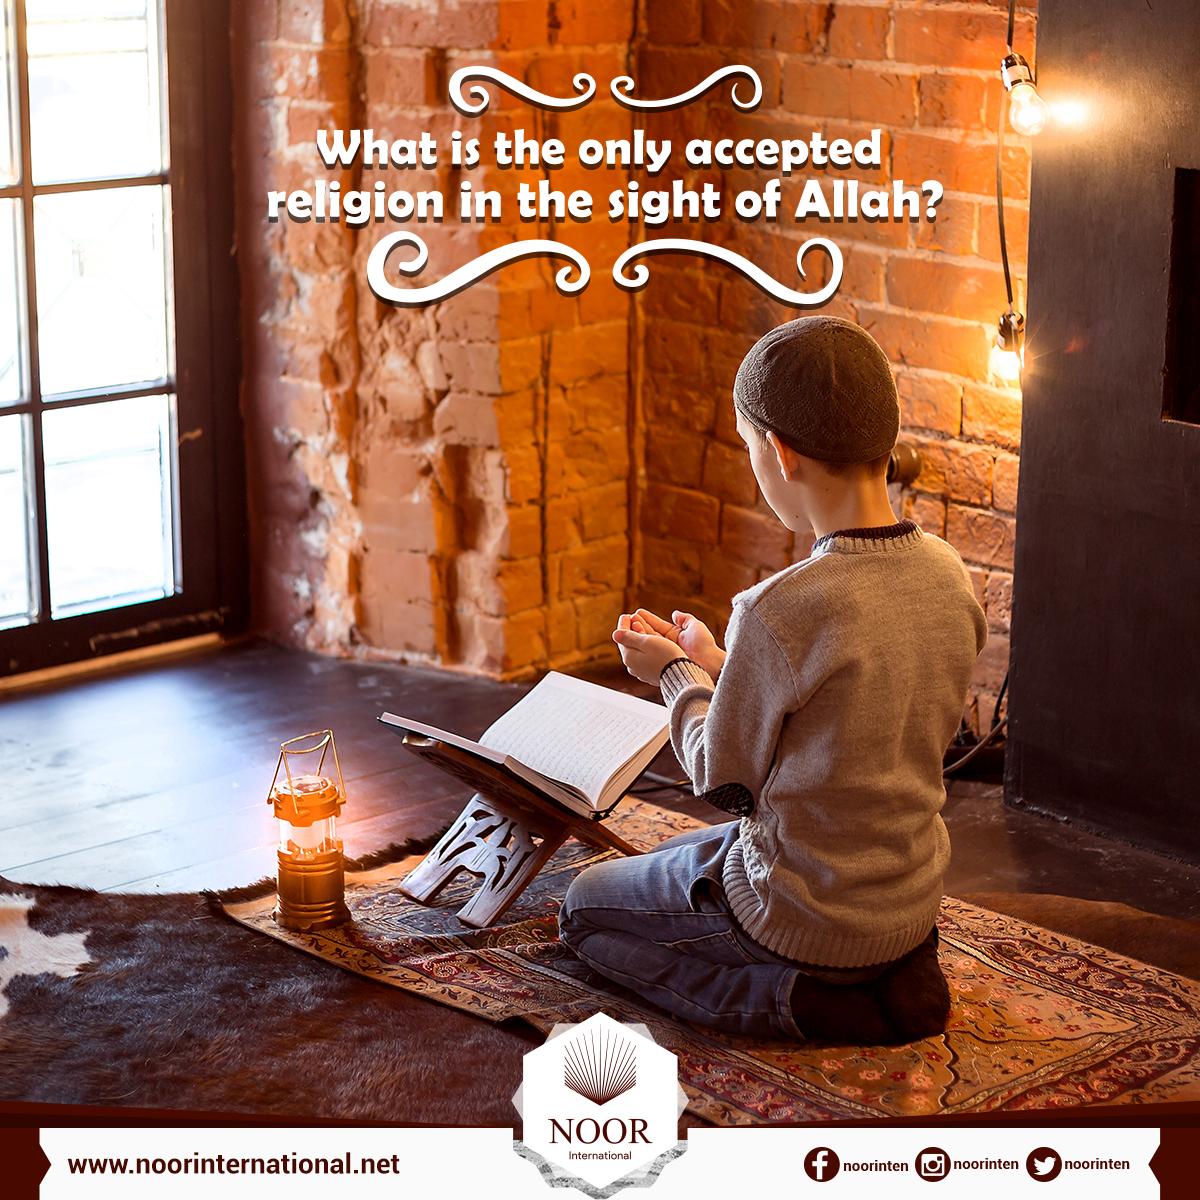 What is the only accepted religion in the sight of Allah?